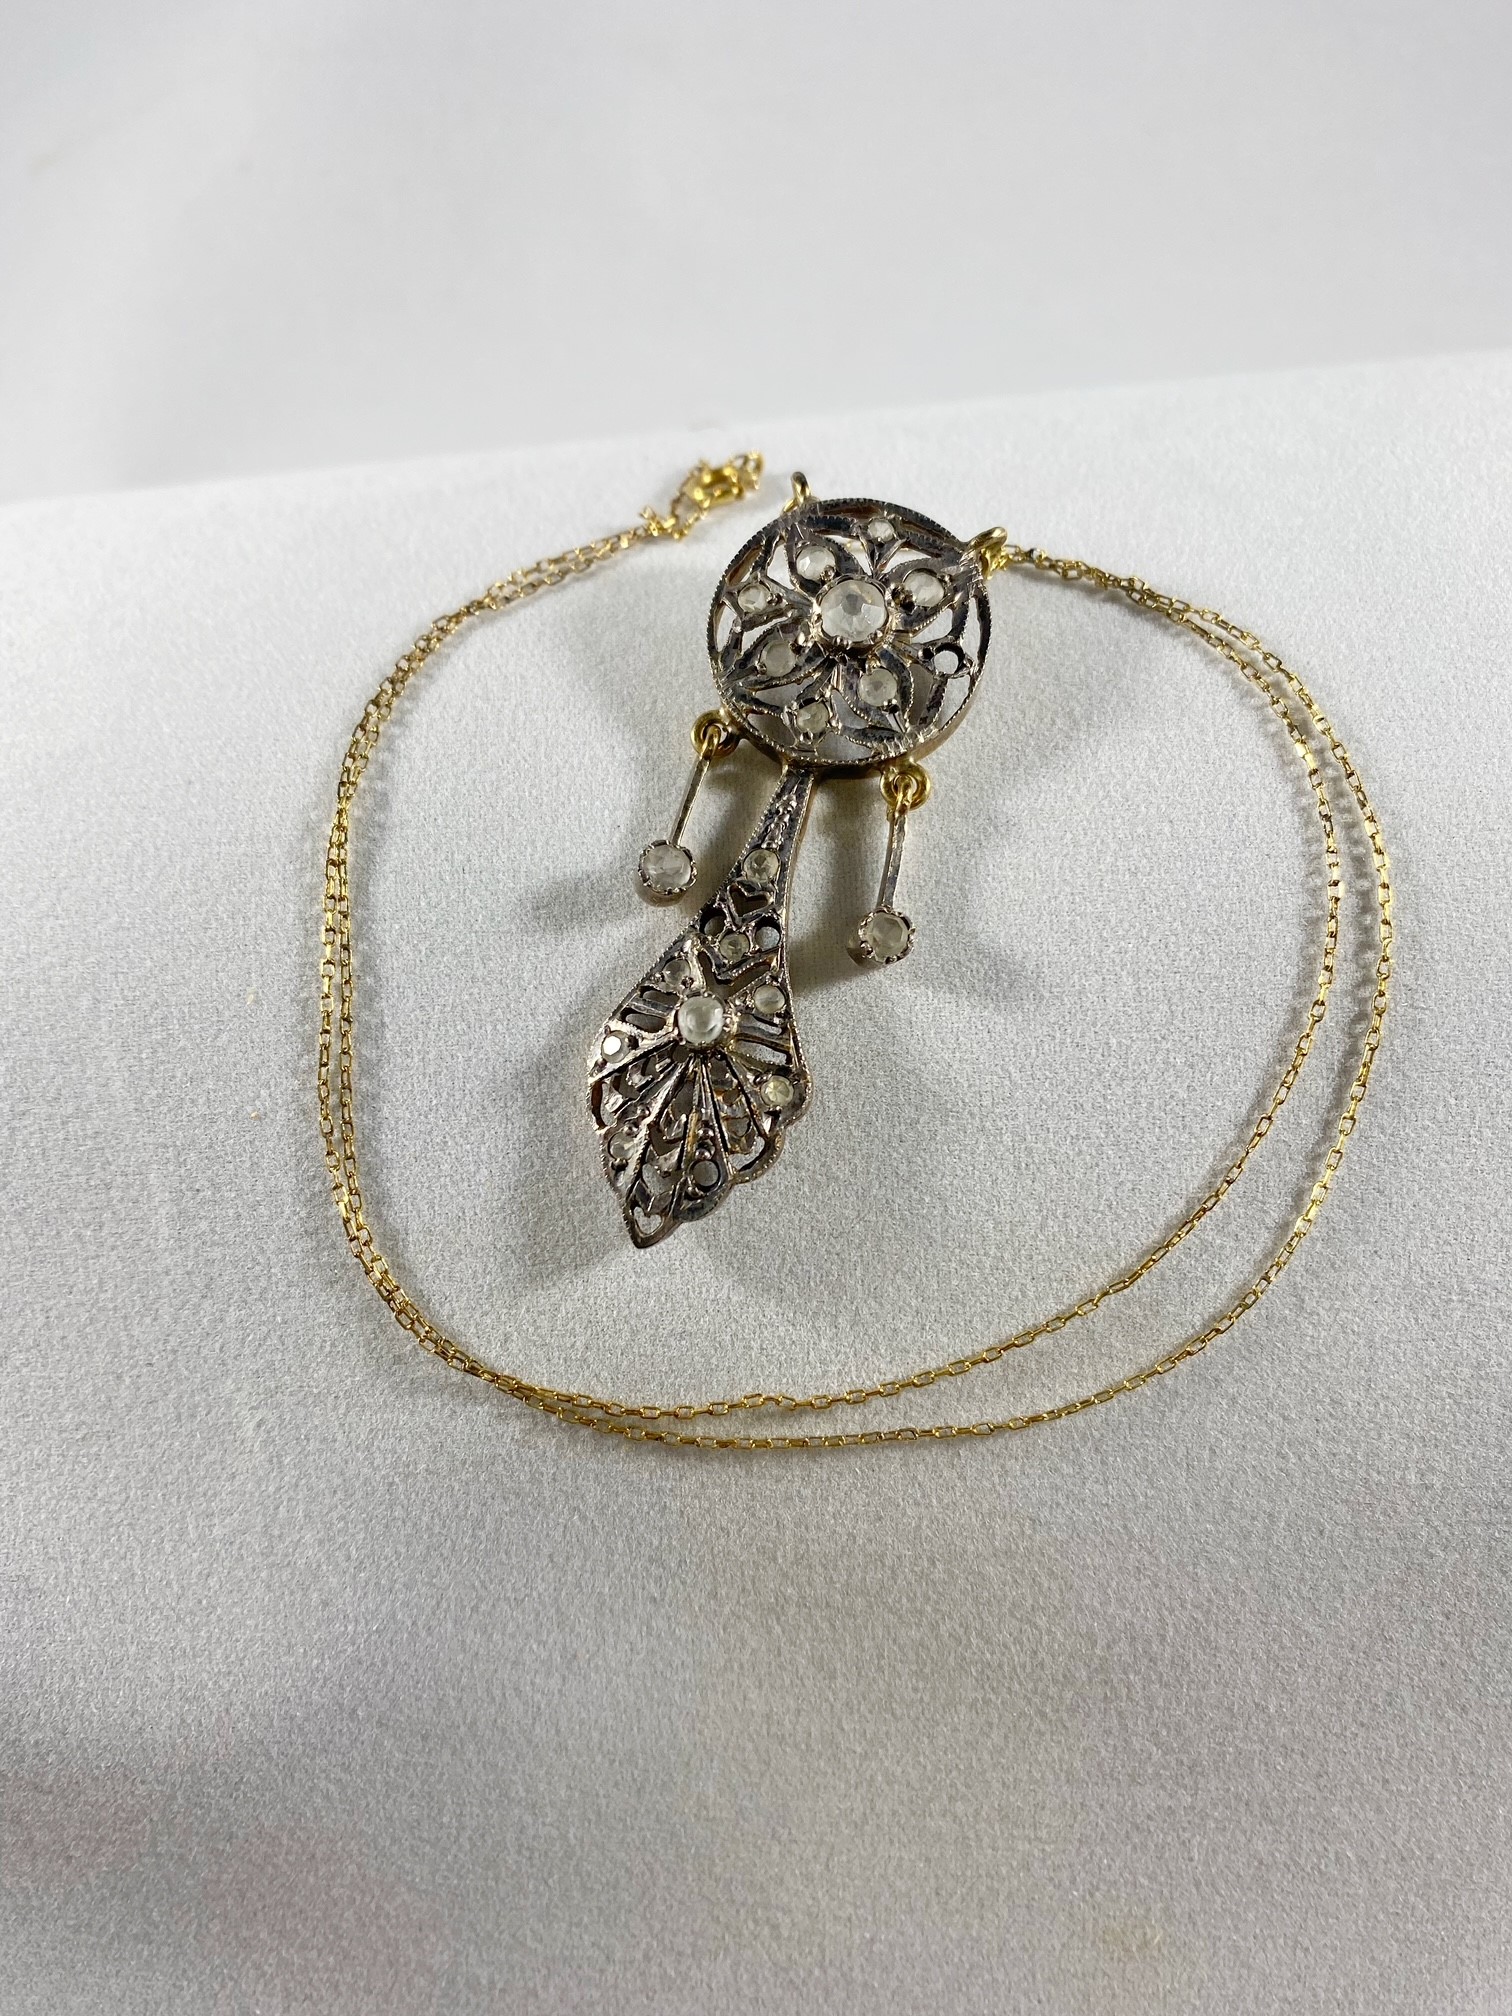 Lot 1063: Gold Colored Chain with Silver Colored Pendant with Clear Stones